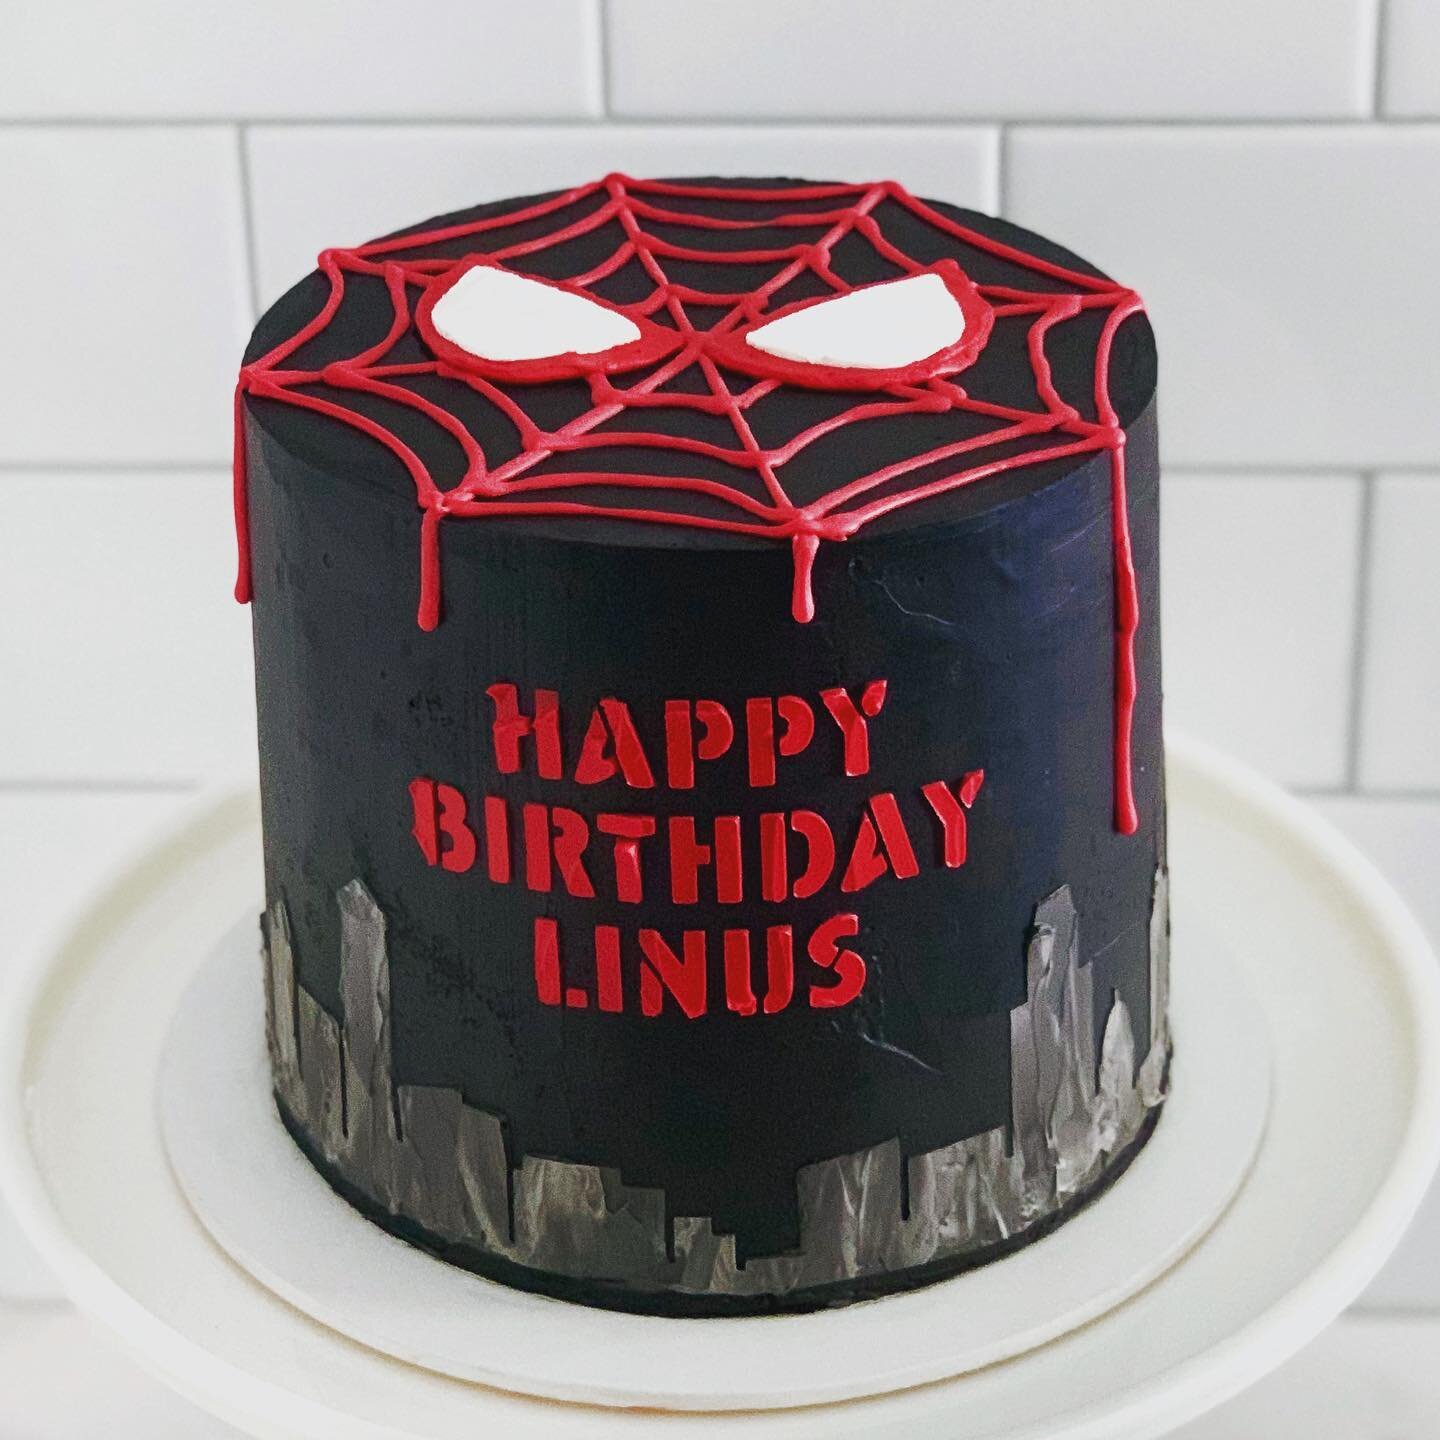 Miles Morales cake for a 6th birthday!

Inside is confetti cake with vanilla buttercream 🕷️